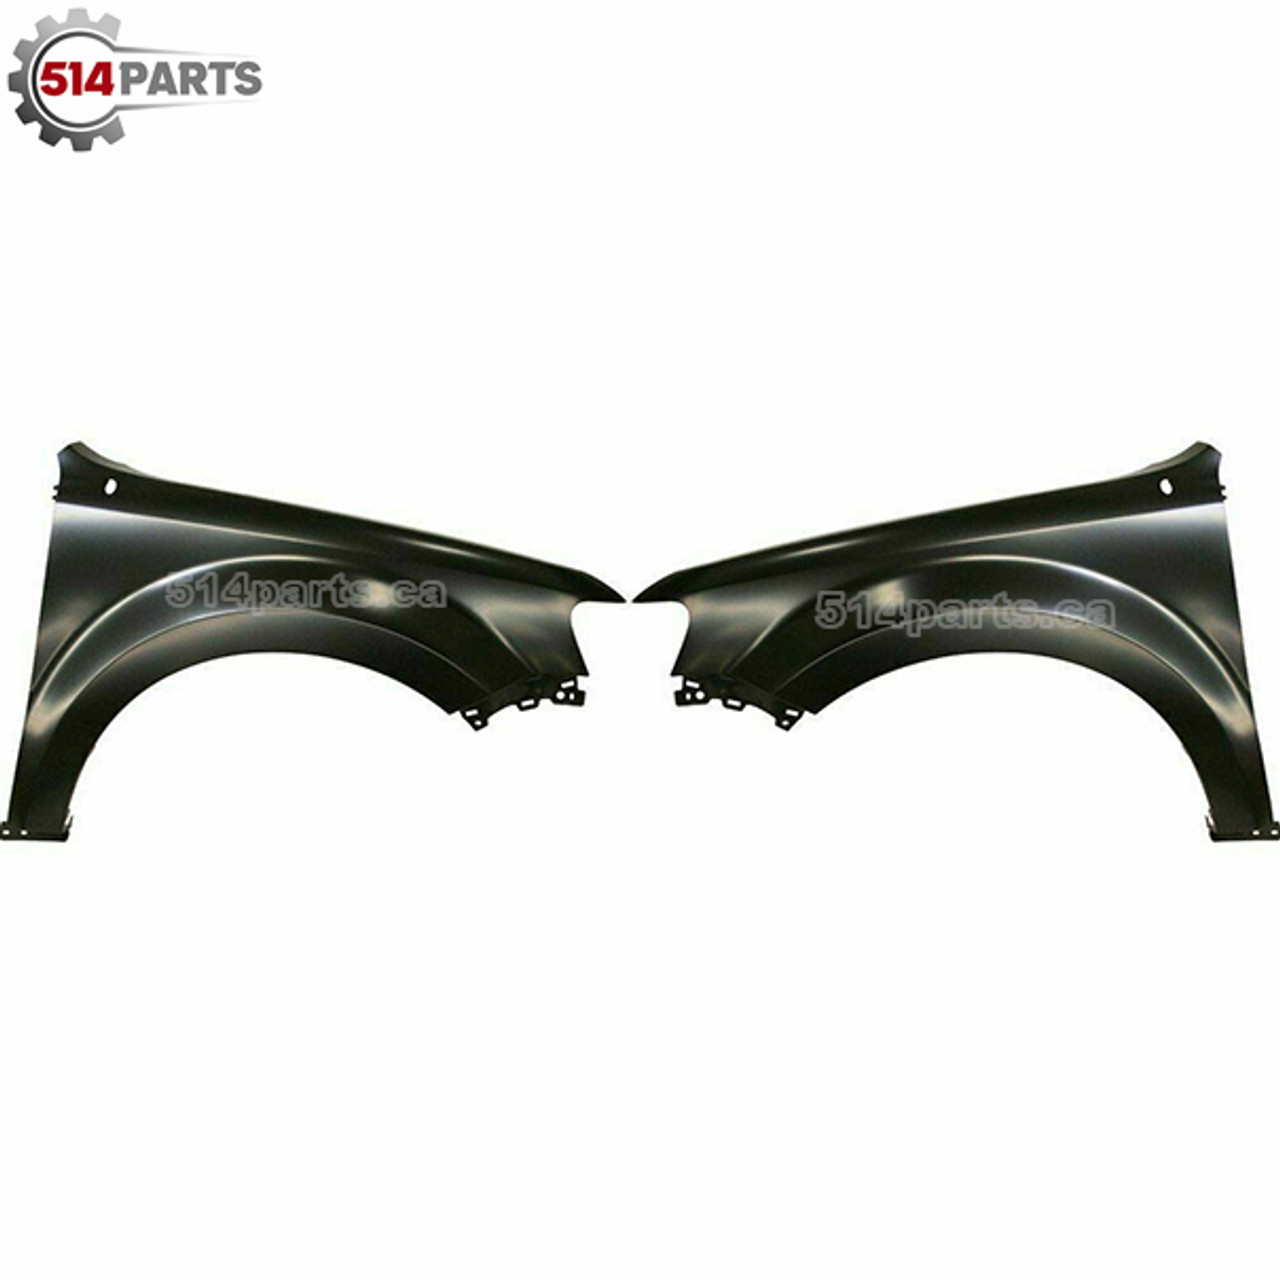 2008 - 2012 FORD ESCAPE and ESCAPE HYBRID FRONT FENDERS - AILES AVANT